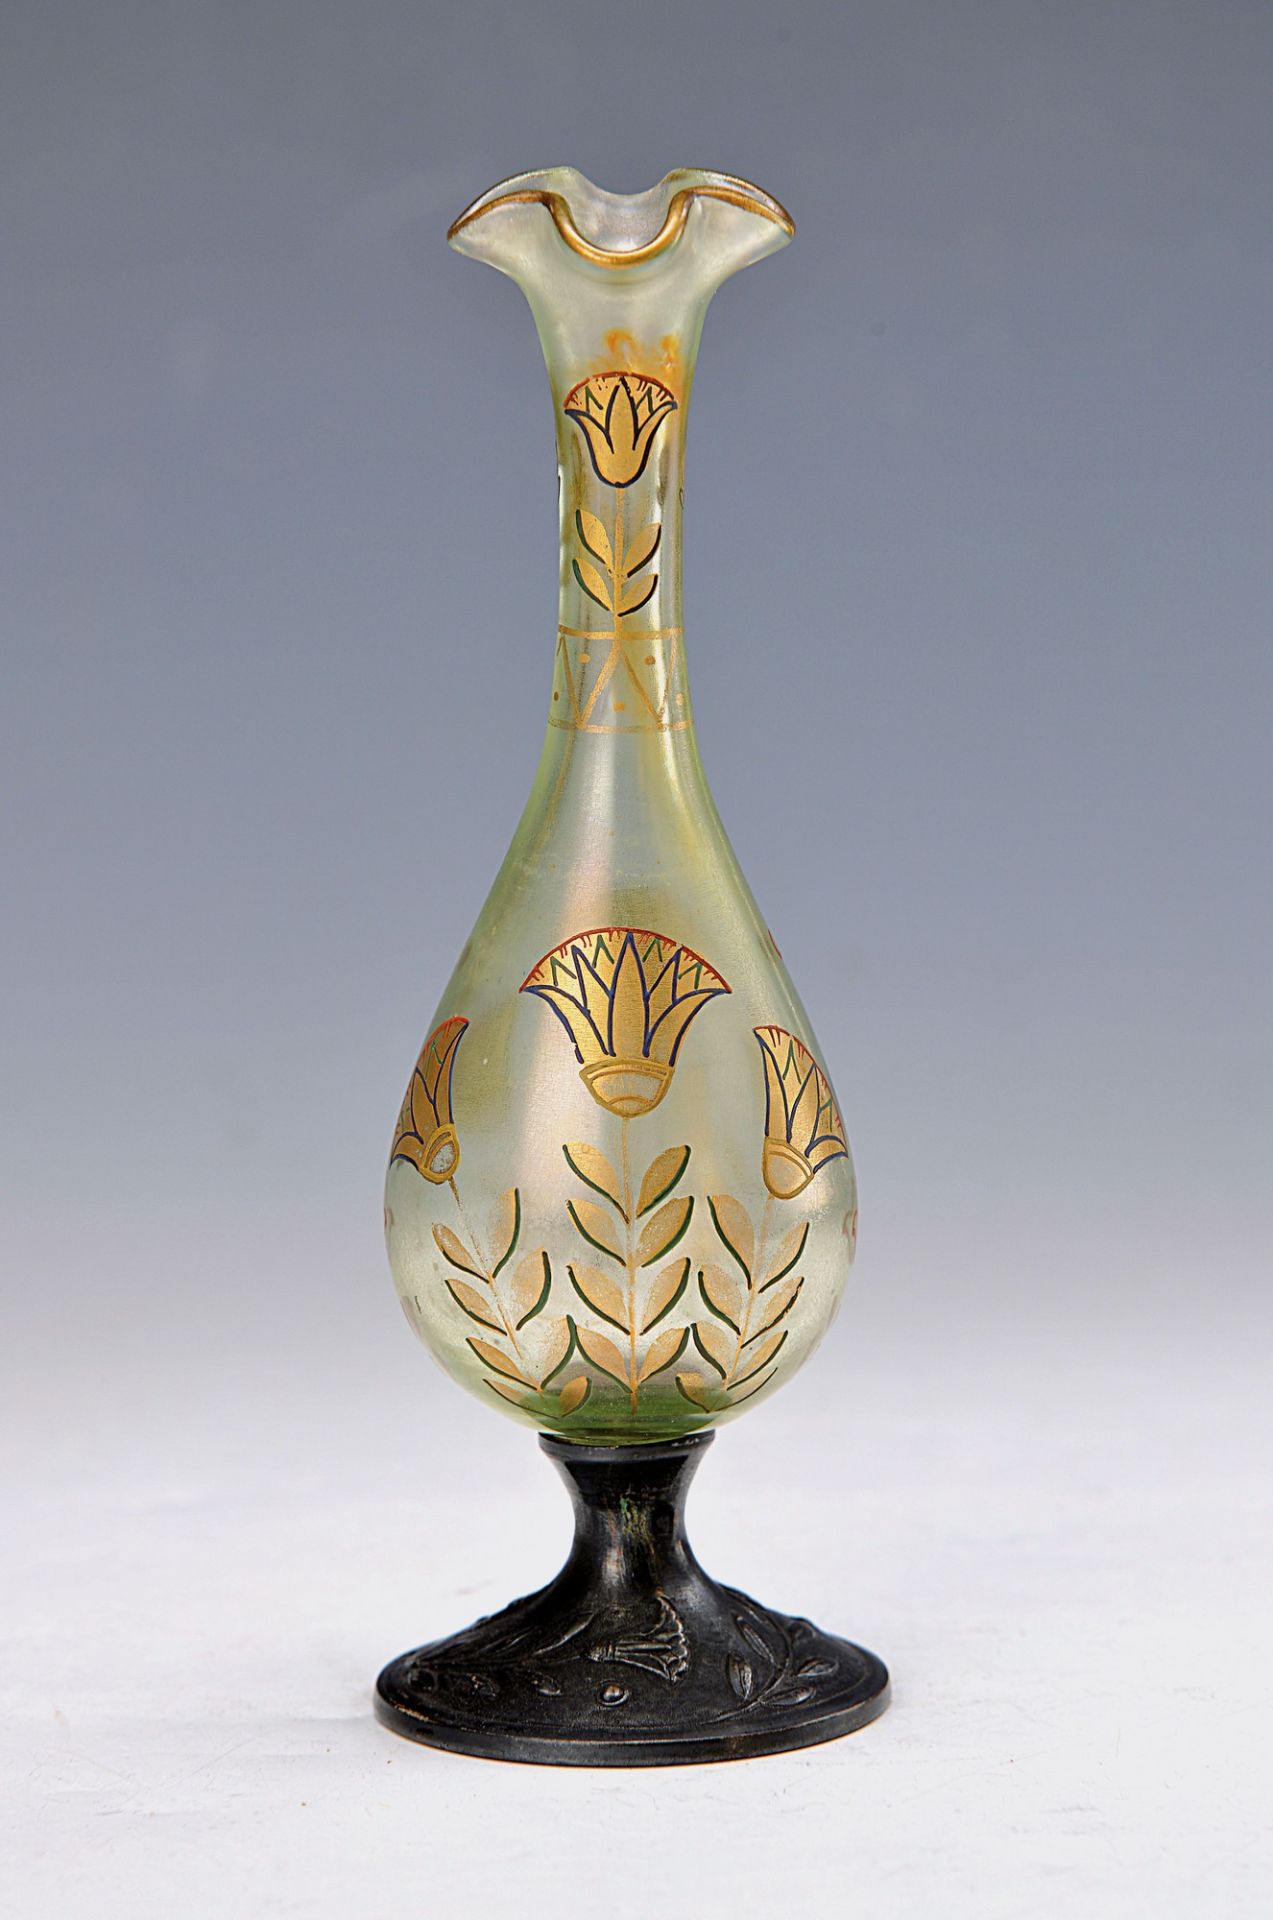 vase, Fritz Heckert, around 1900, colorless glass, optical blown, greenish external layer,etched and